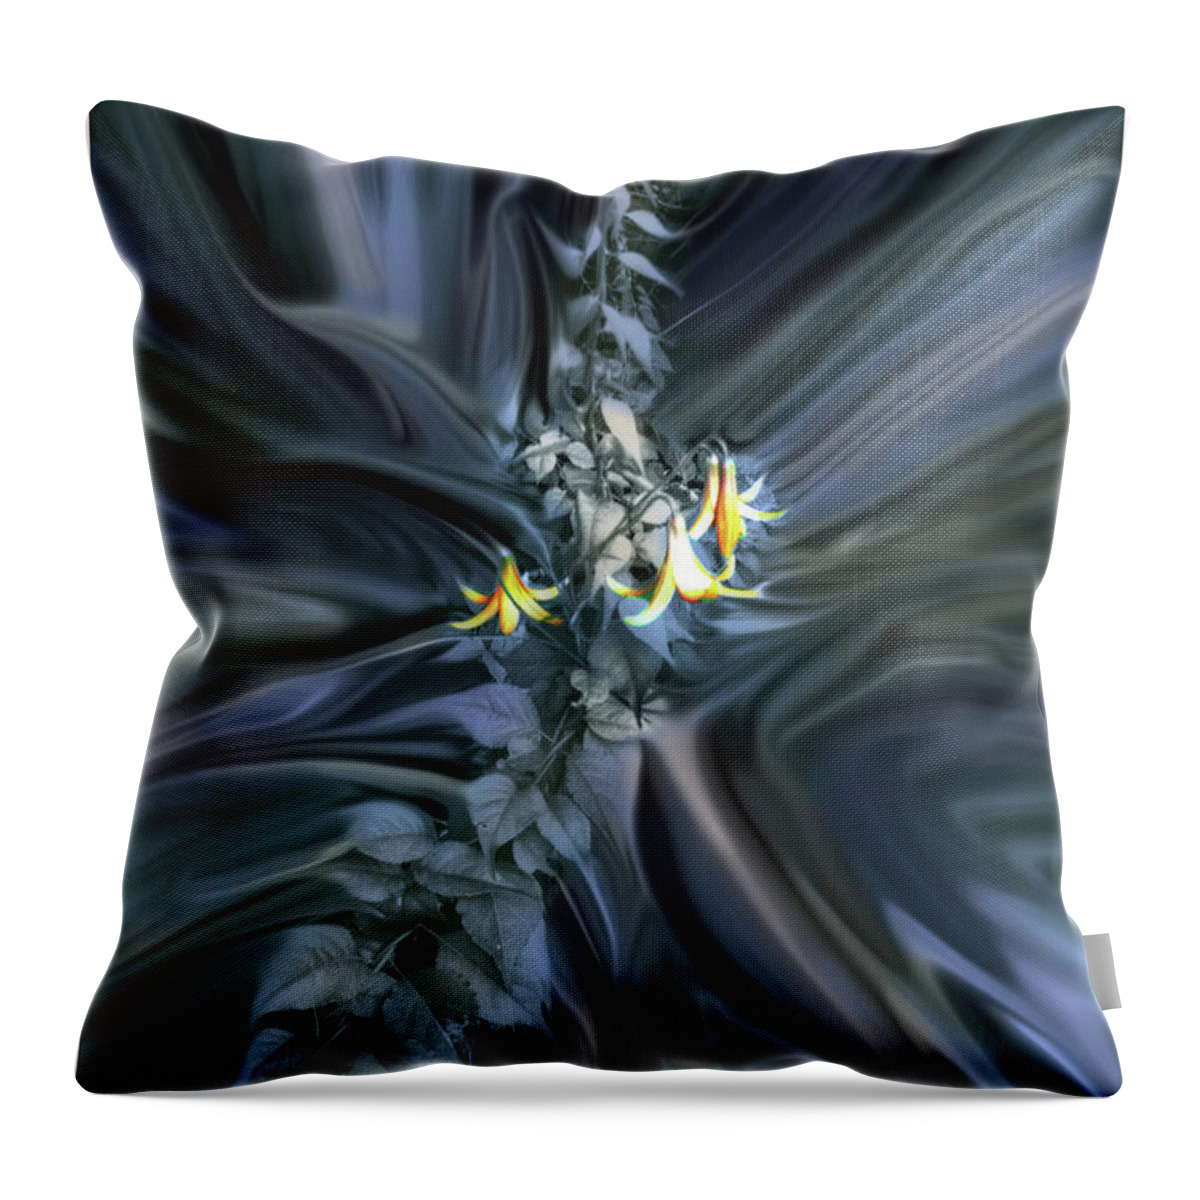 Canada Throw Pillow featuring the photograph Canada Lily Abstract by Wayne King